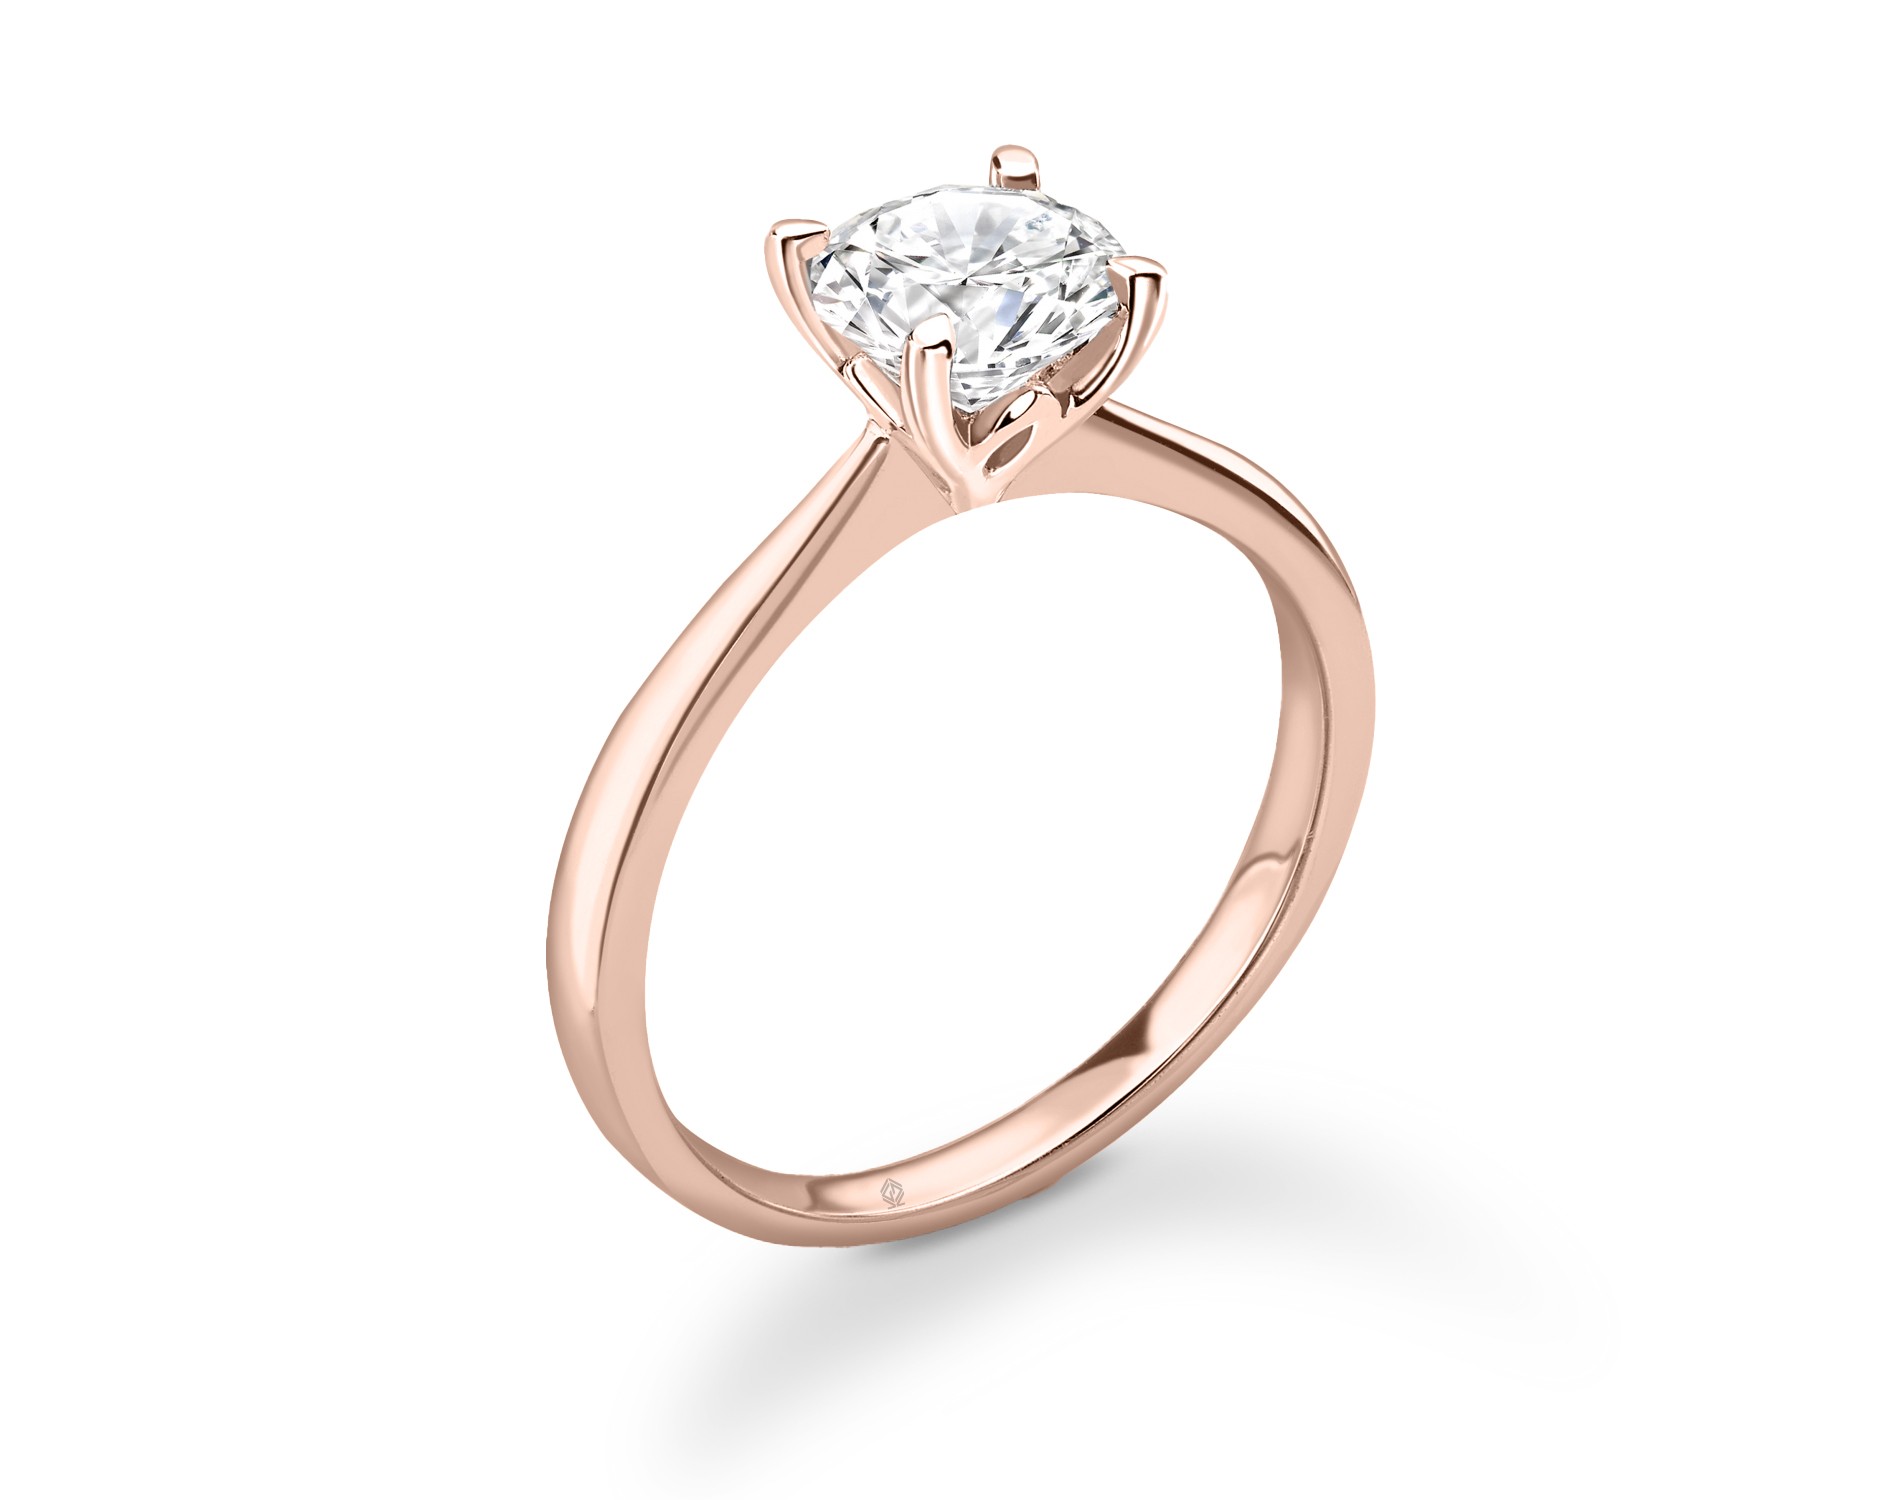 18K ROSE GOLD 4 PRONGS HEAD SOLITAIRE ROUND CUT DIAMOND ENGAGEMENT RING